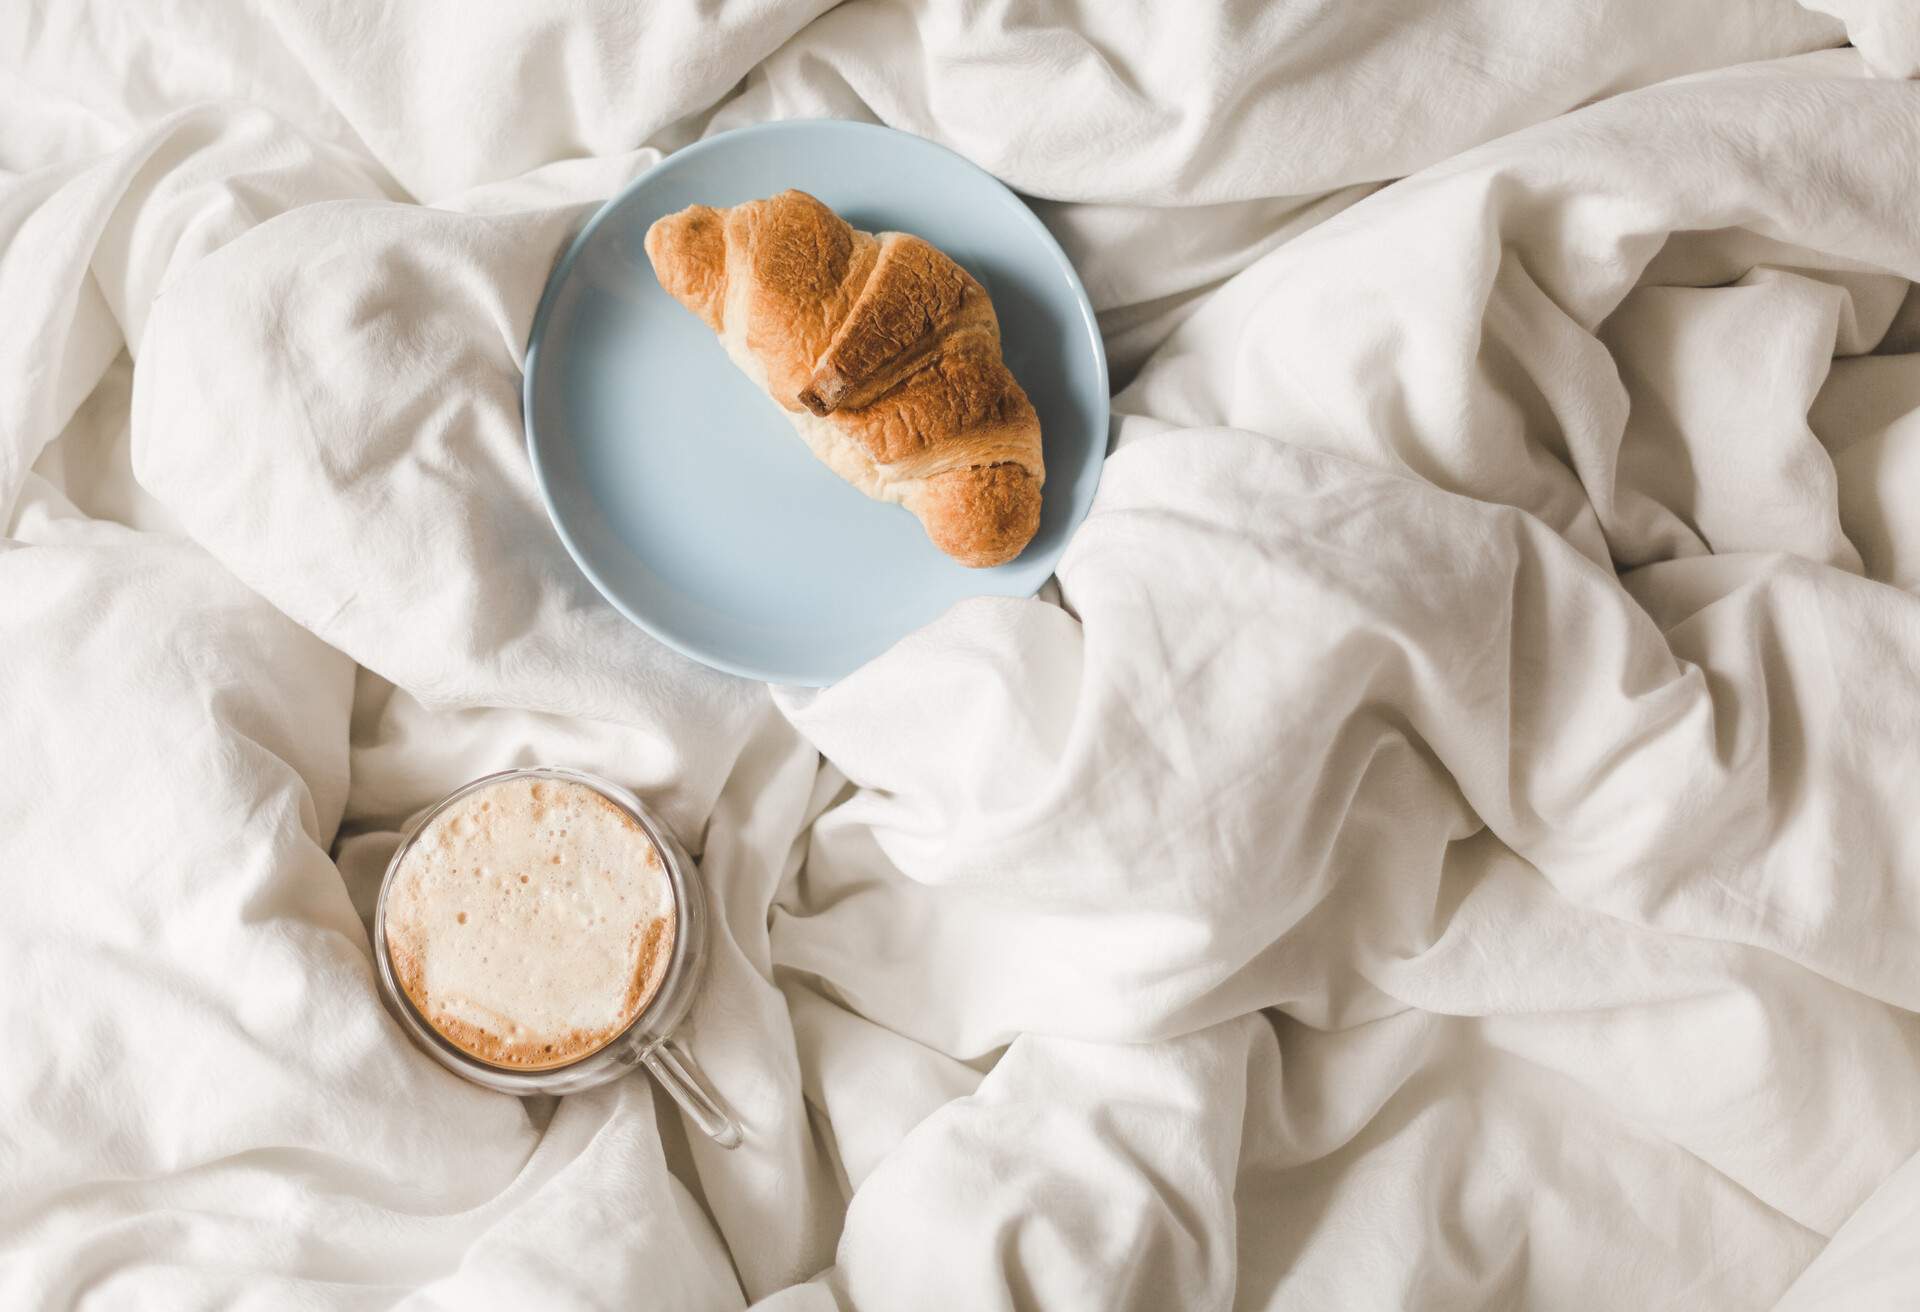 A croissant bread on a blue plate and a cup of coffee served on the white bed.